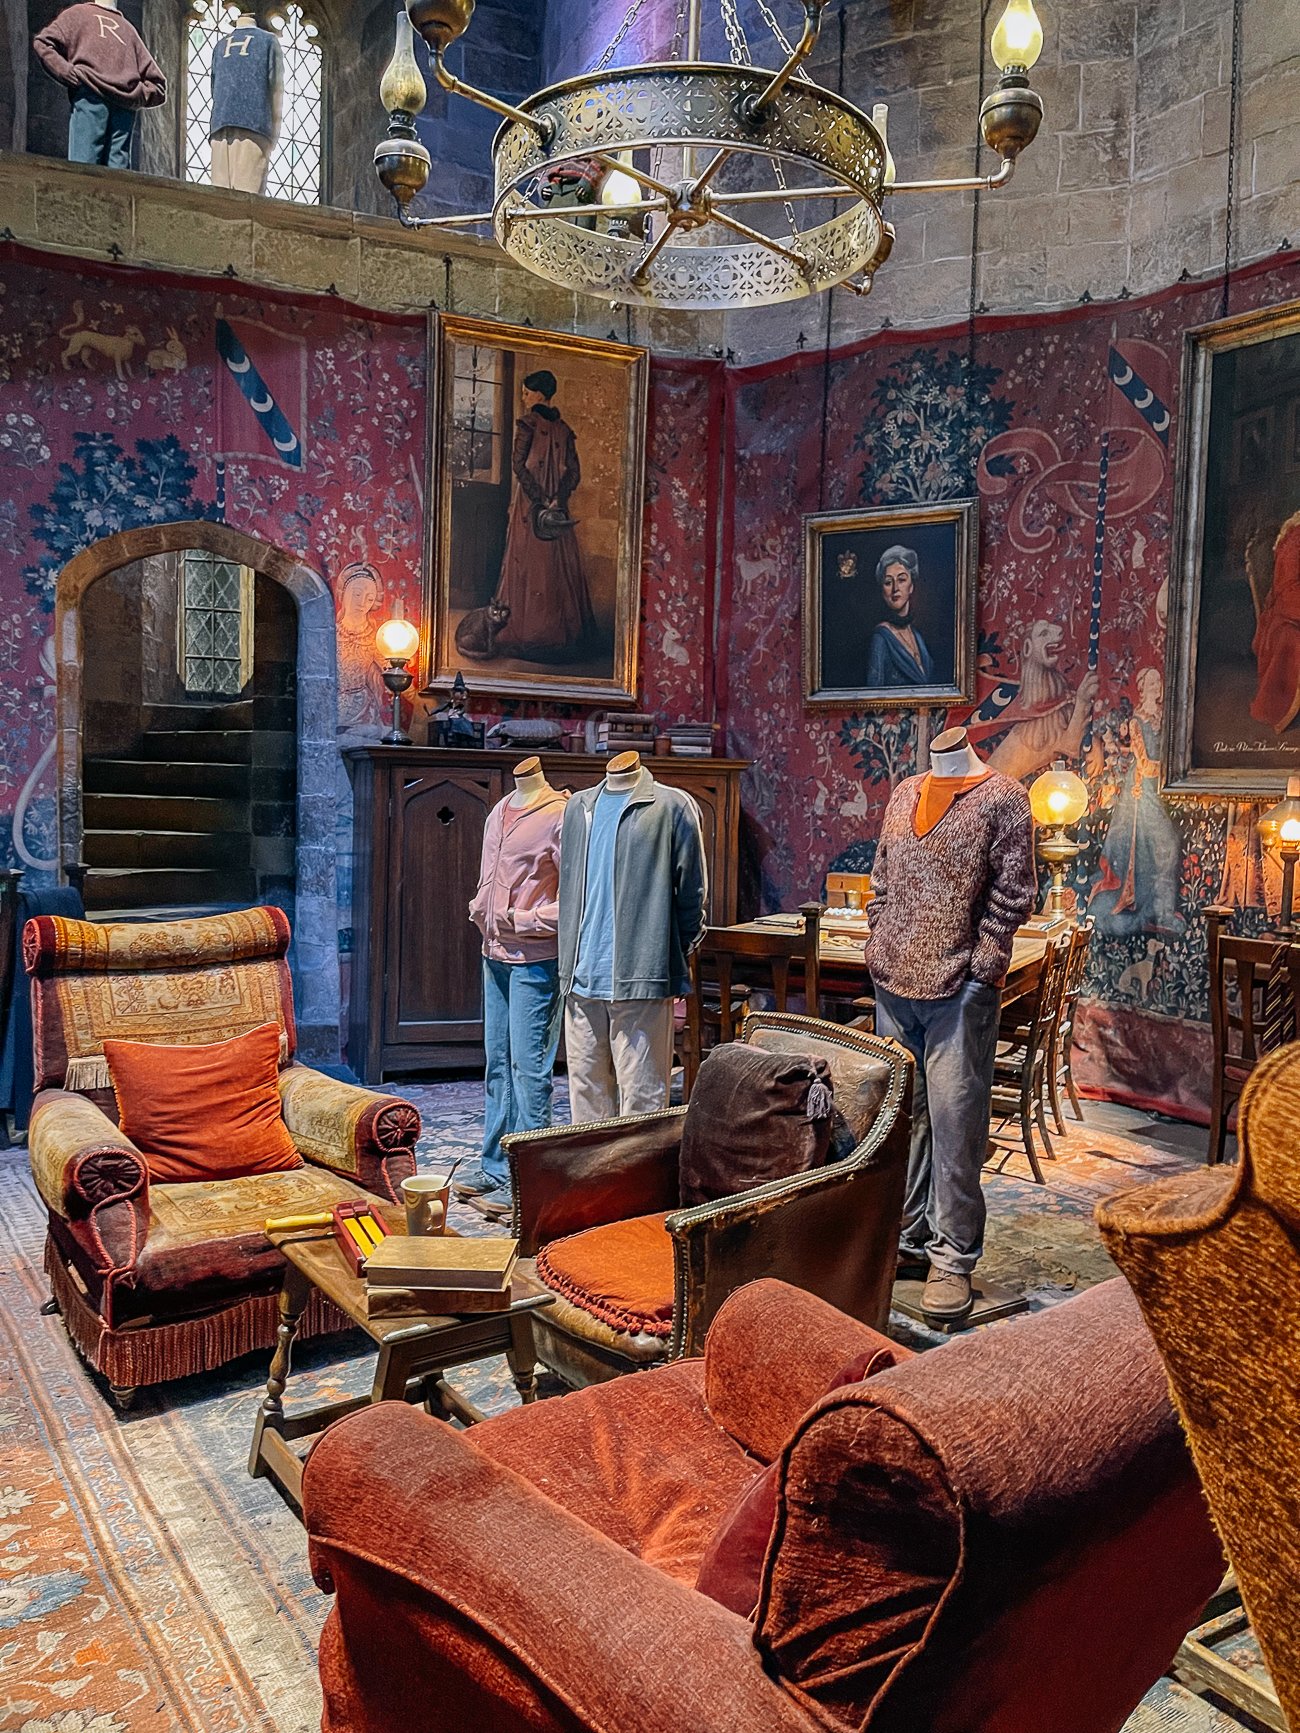 The Gryffindor common room at Harry Potter studio tour with Harry, Ron, and Hermione third movie mannequins.